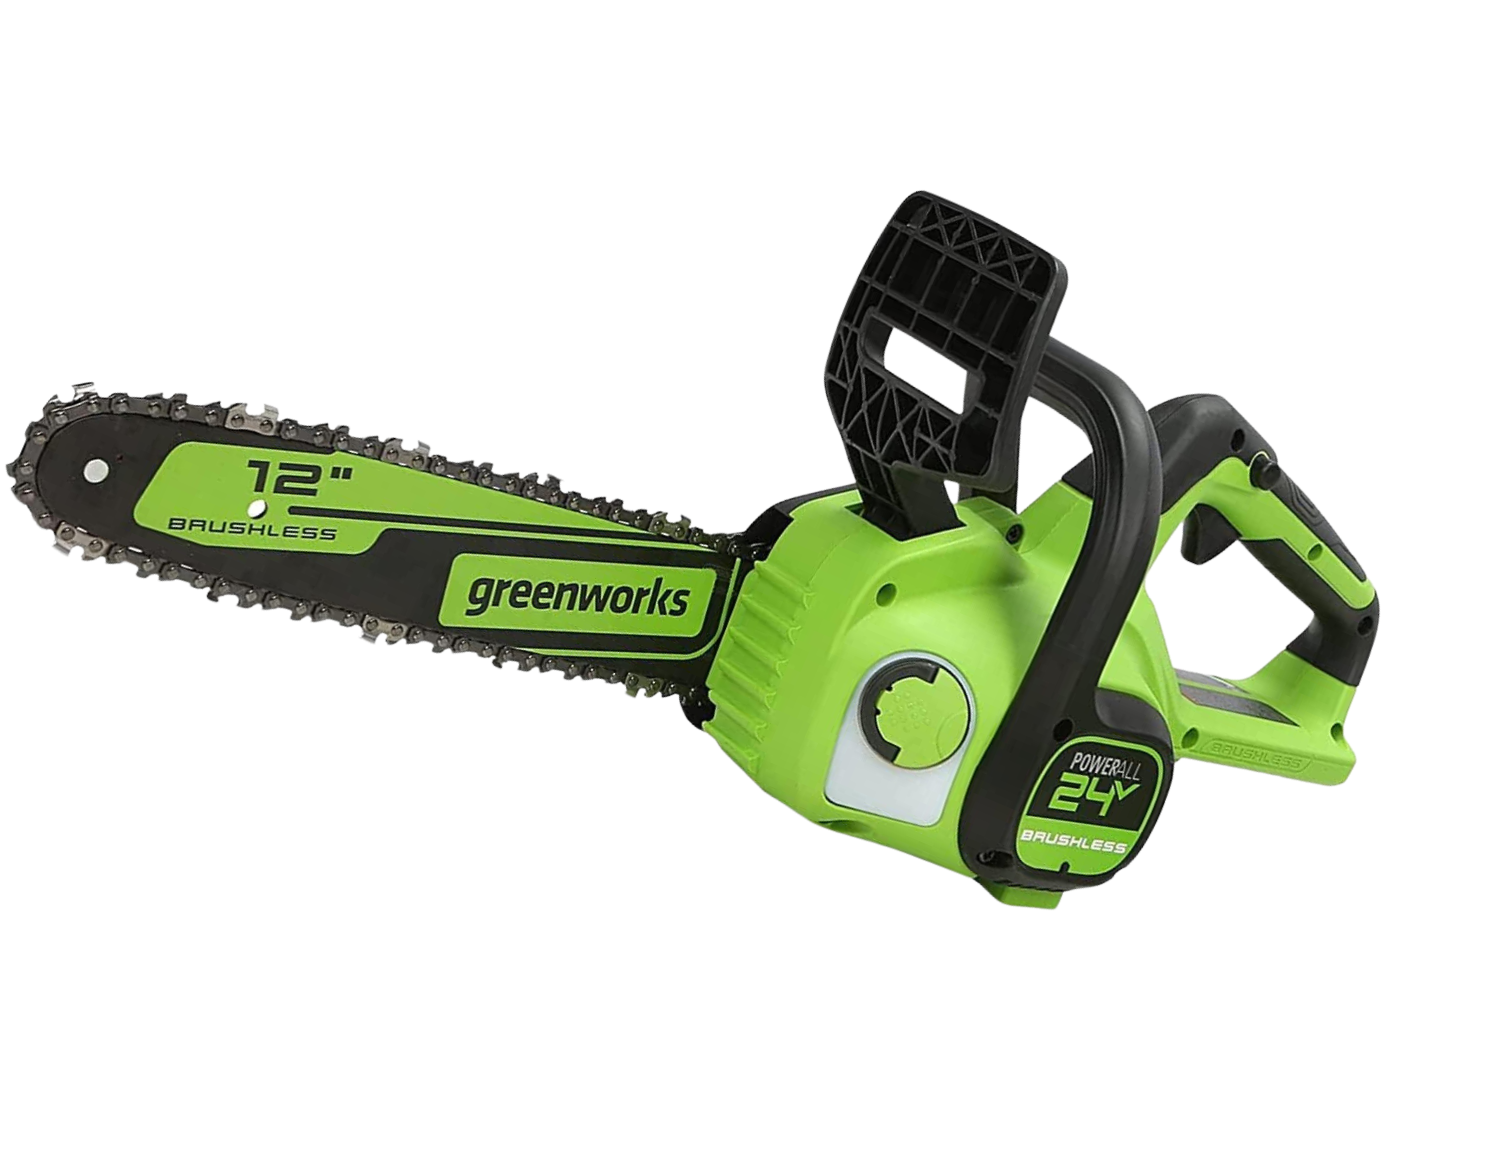 a husqvarna chainsaw on a white background